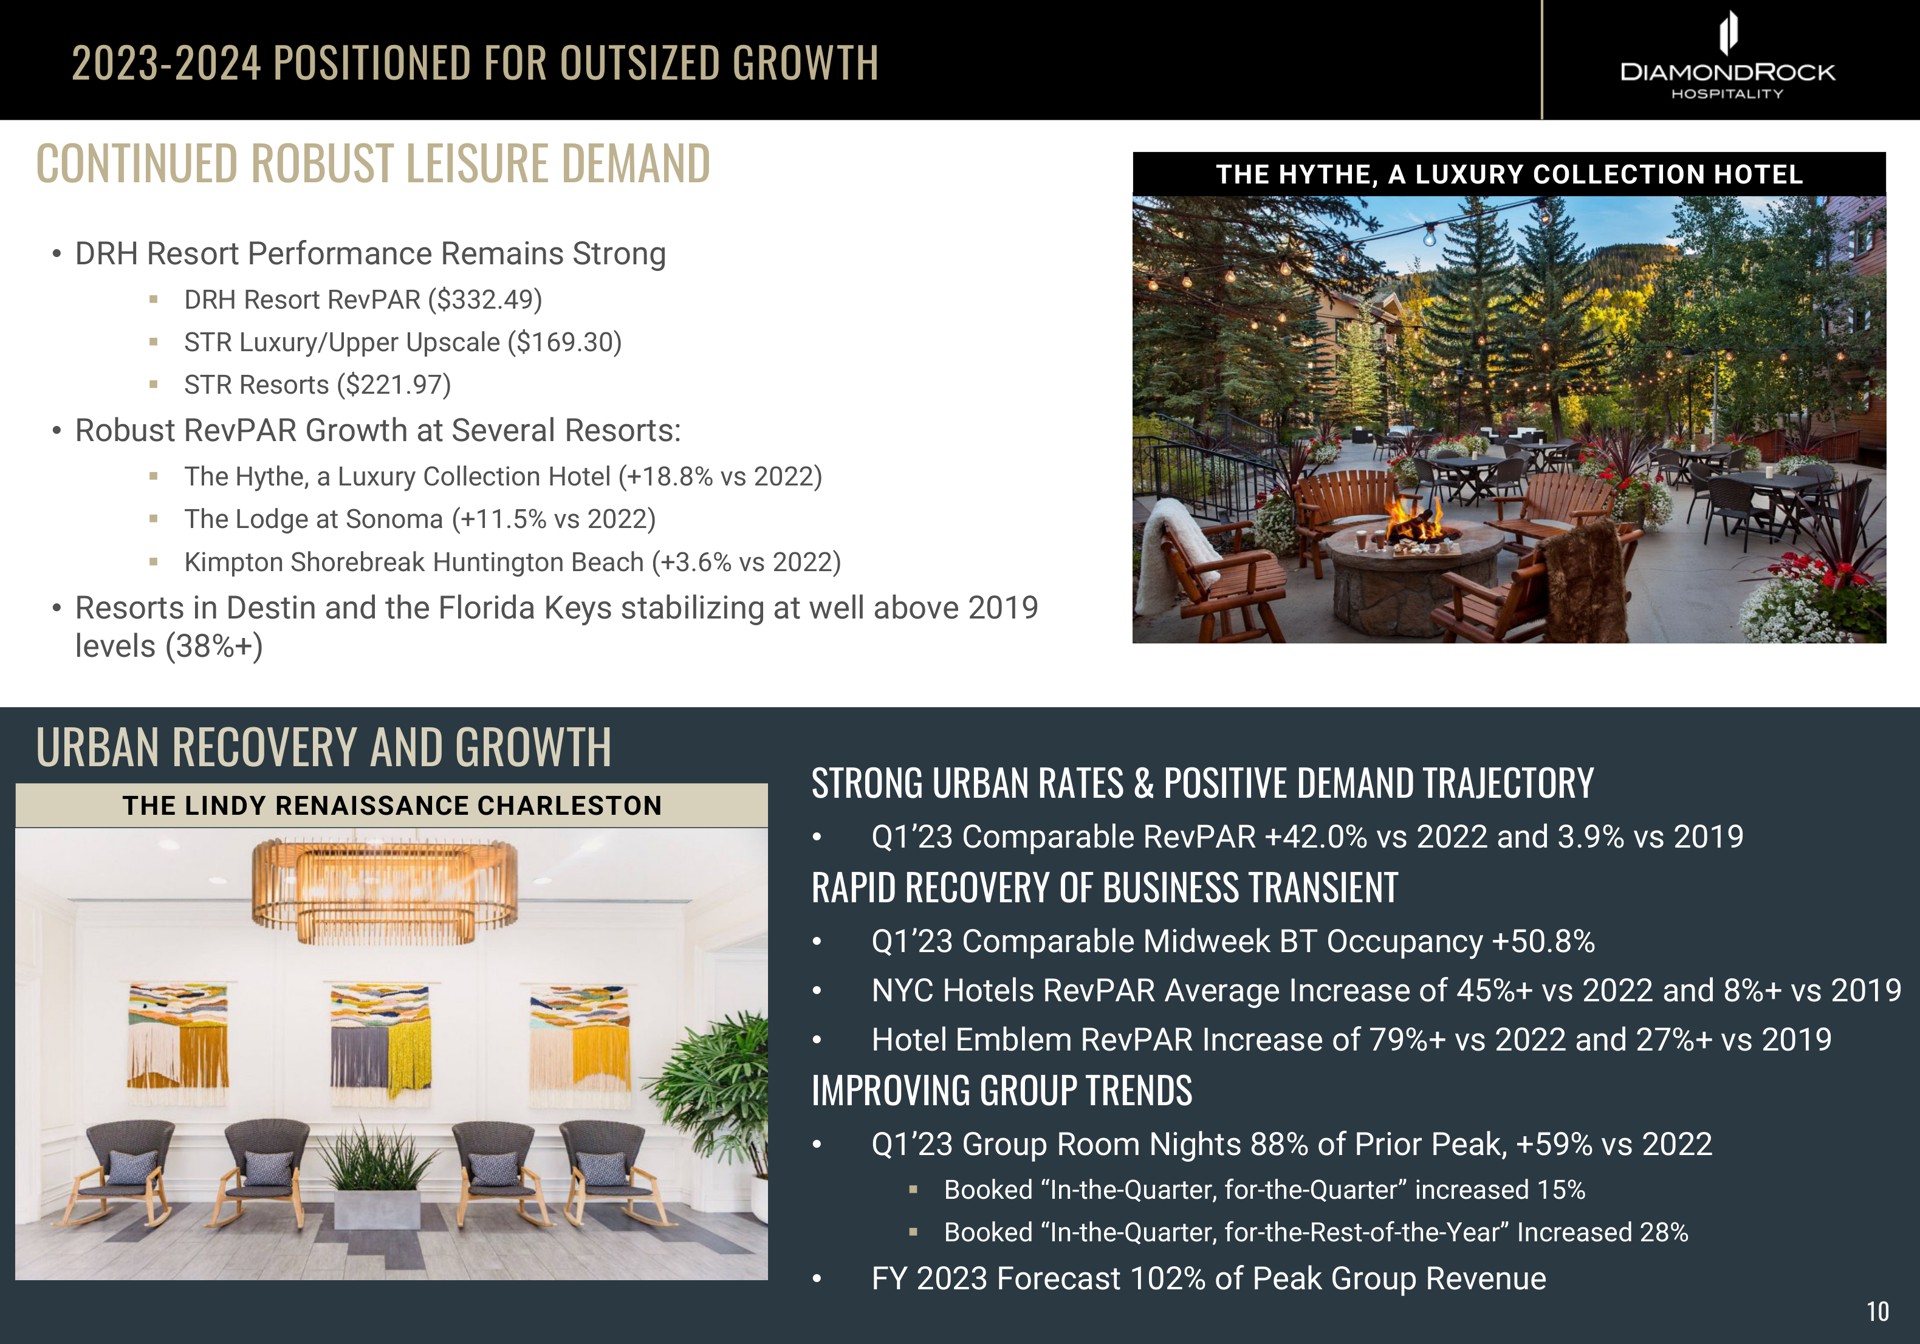 positioned for outsized growth continued robust leisure demand urban recovery and growth strong urban rates positive demand trajectory rapid recovery of business transient improving group trends ait a | DiamondRock Hospitality